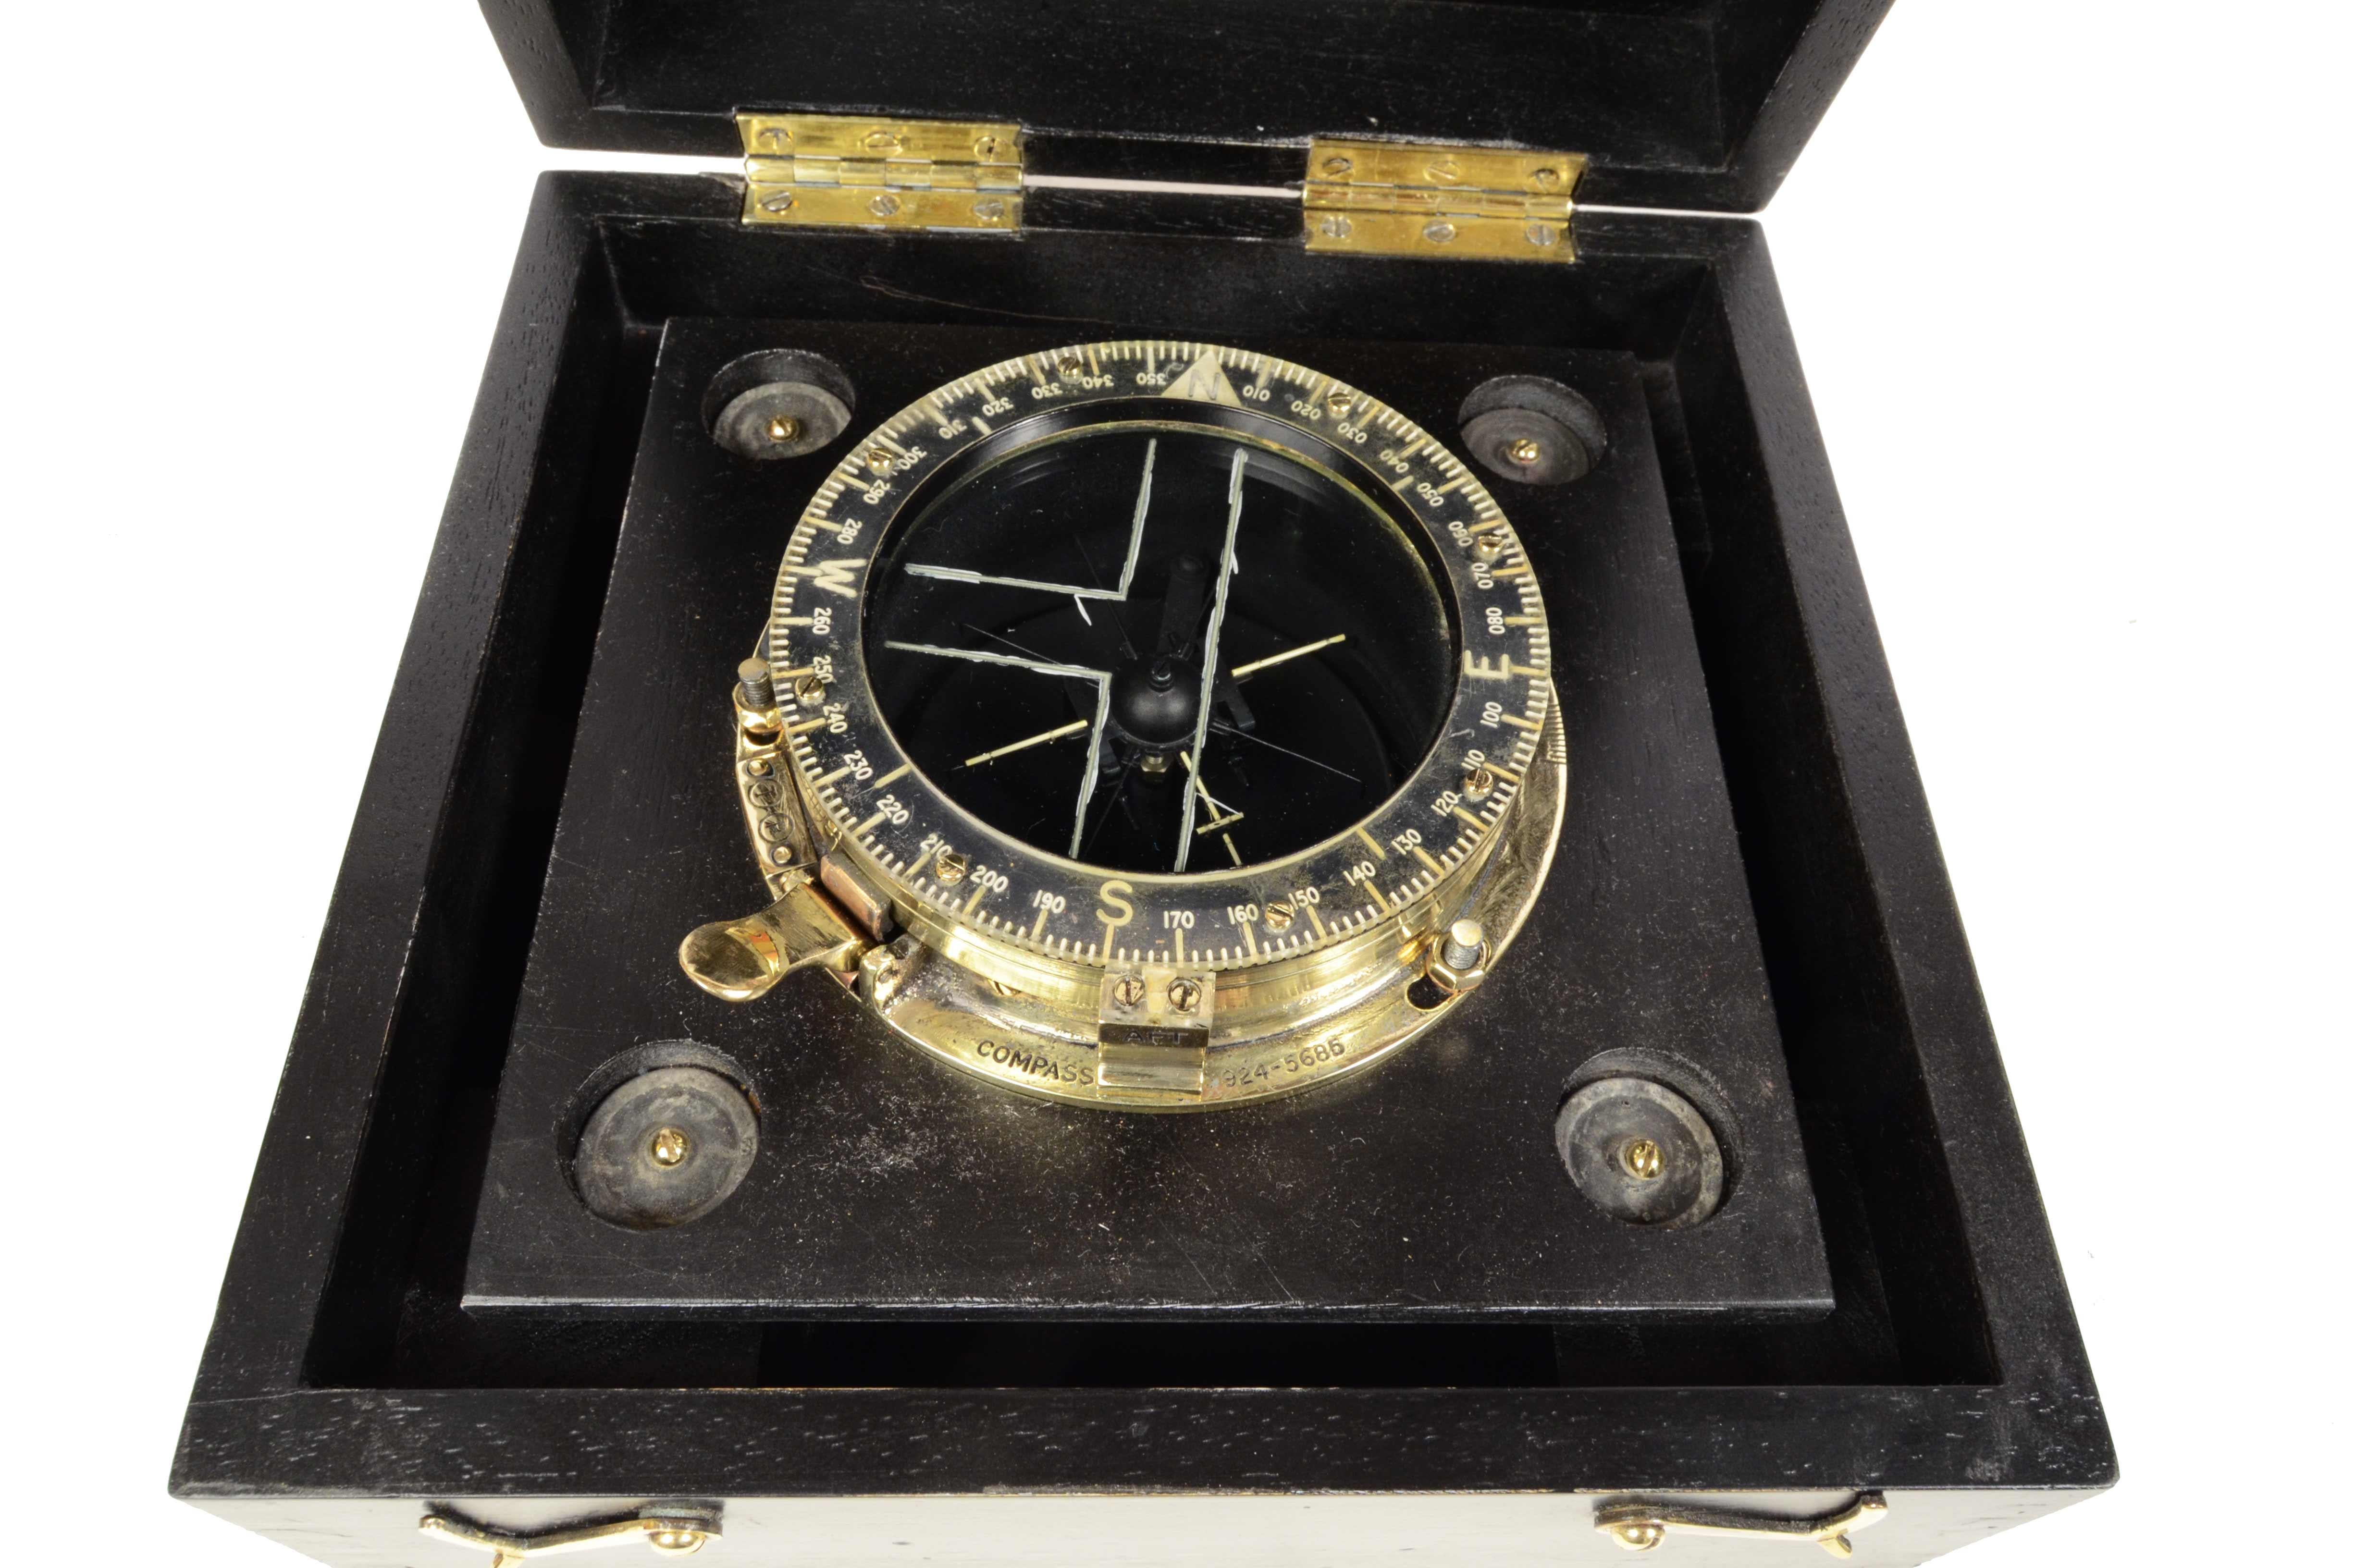 Brass antique compass complete with original wooden box where the compass is mounted on shock absorbers, signed supplied with the Boeing B-17 Flyin Fortress American bomber used during the Second World War and known as a “Flying Fortress”. This